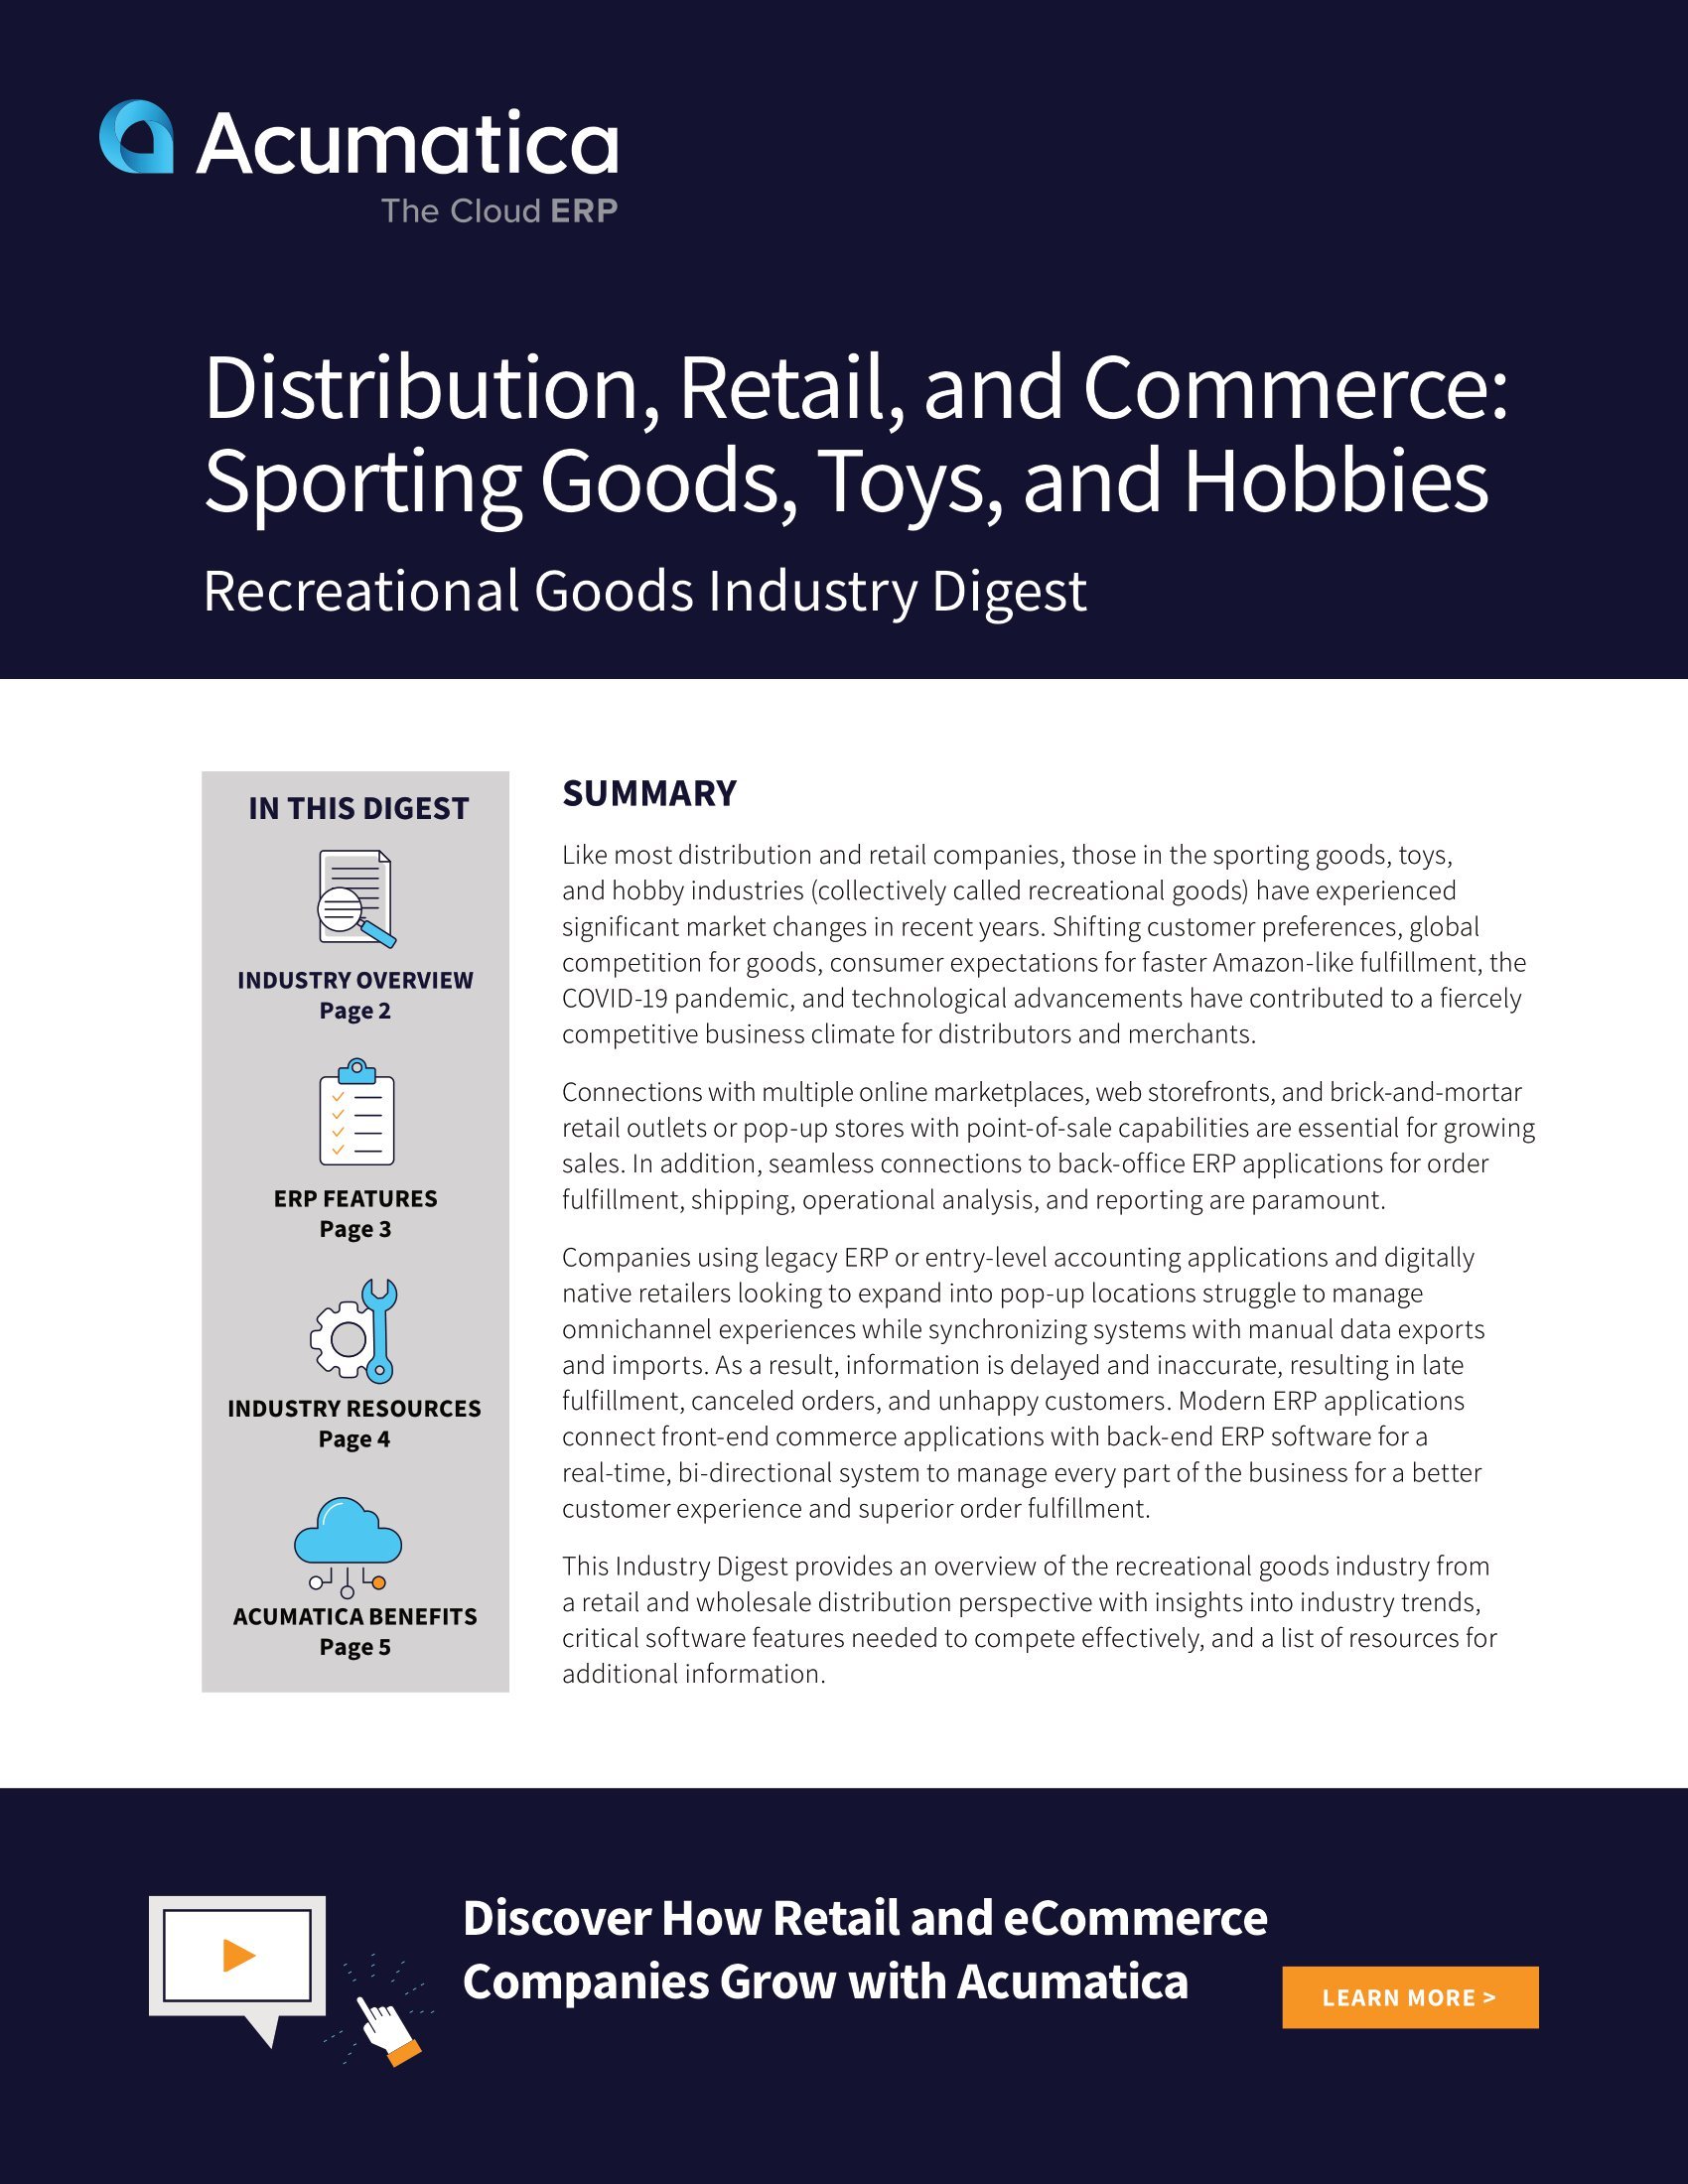 Why The Recreational Goods Industry Needs Modern ERP Applications